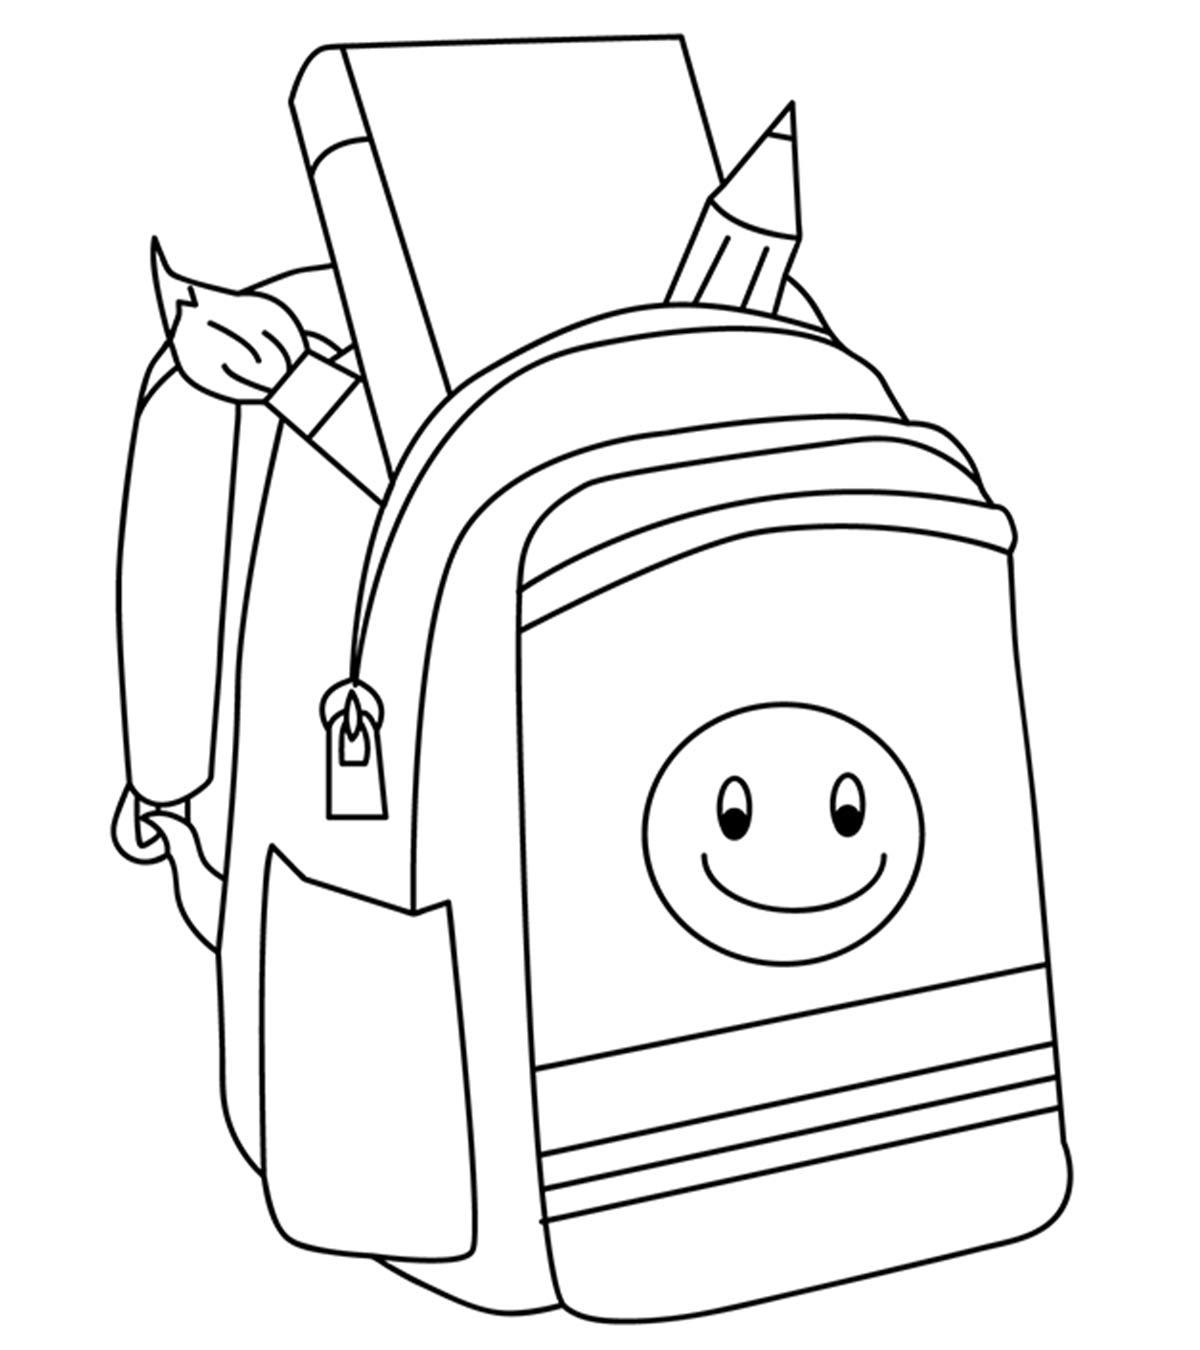 20 Fun Back To School Coloring Pages Your Toddler Will Love To Color